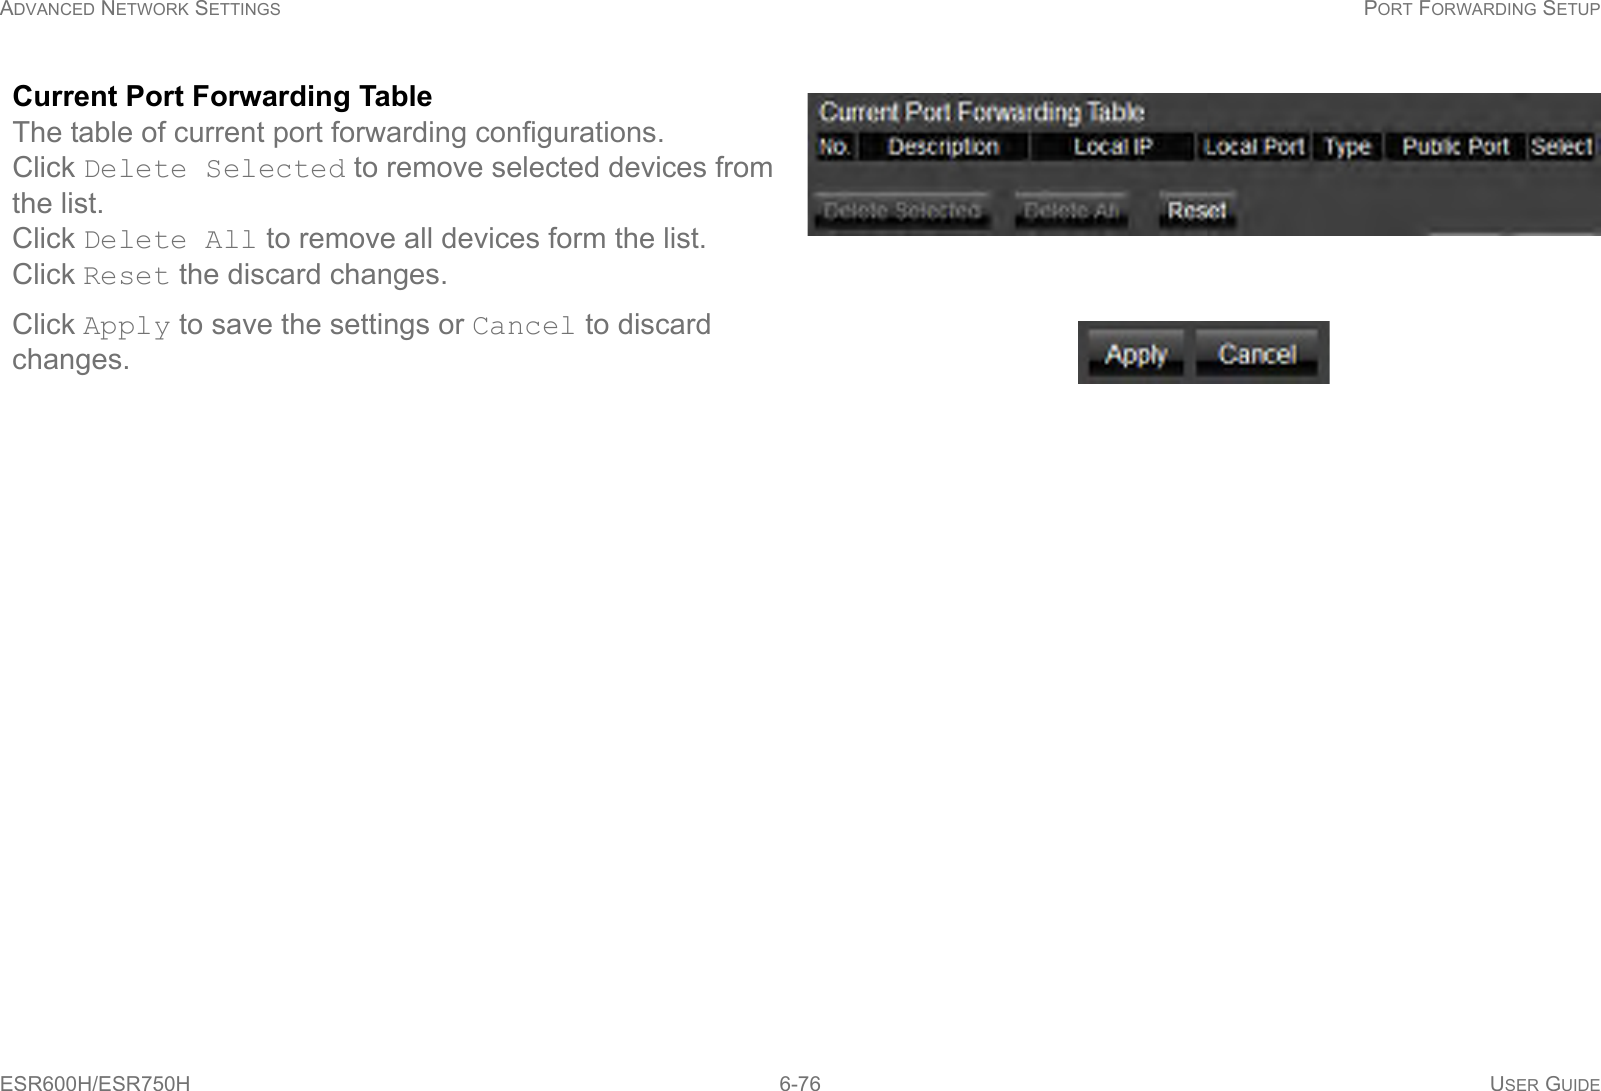 ADVANCED NETWORK SETTINGS PORT FORWARDING SETUPESR600H/ESR750H 6-76 USER GUIDECurrent Port Forwarding TableThe table of current port forwarding configurations.Click Delete Selected to remove selected devices from the list.Click Delete All to remove all devices form the list.Click Reset the discard changes.Click Apply to save the settings or Cancel to discard changes.